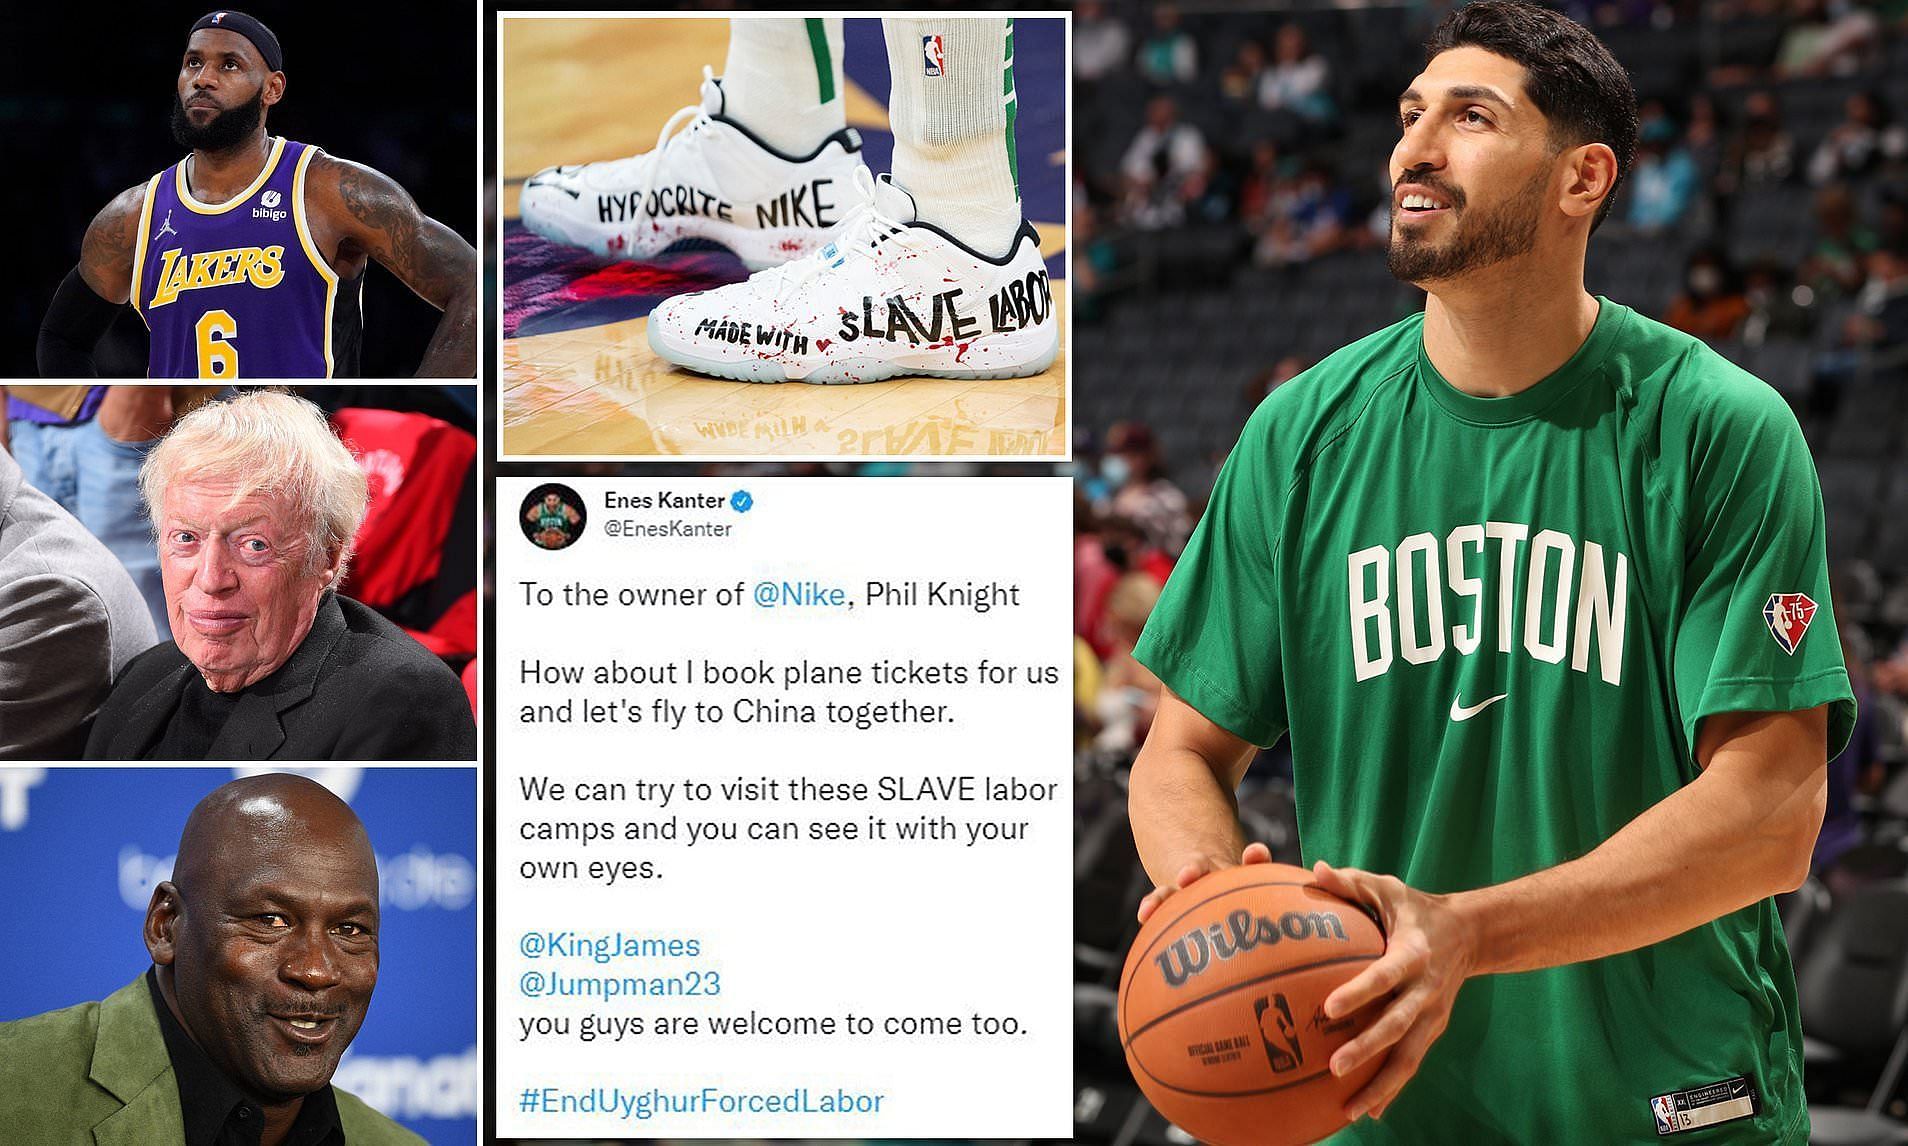 Enes Kanter has accused Michael Jordan of neglecting the needs of black communities. [Photo: Daily Mail]